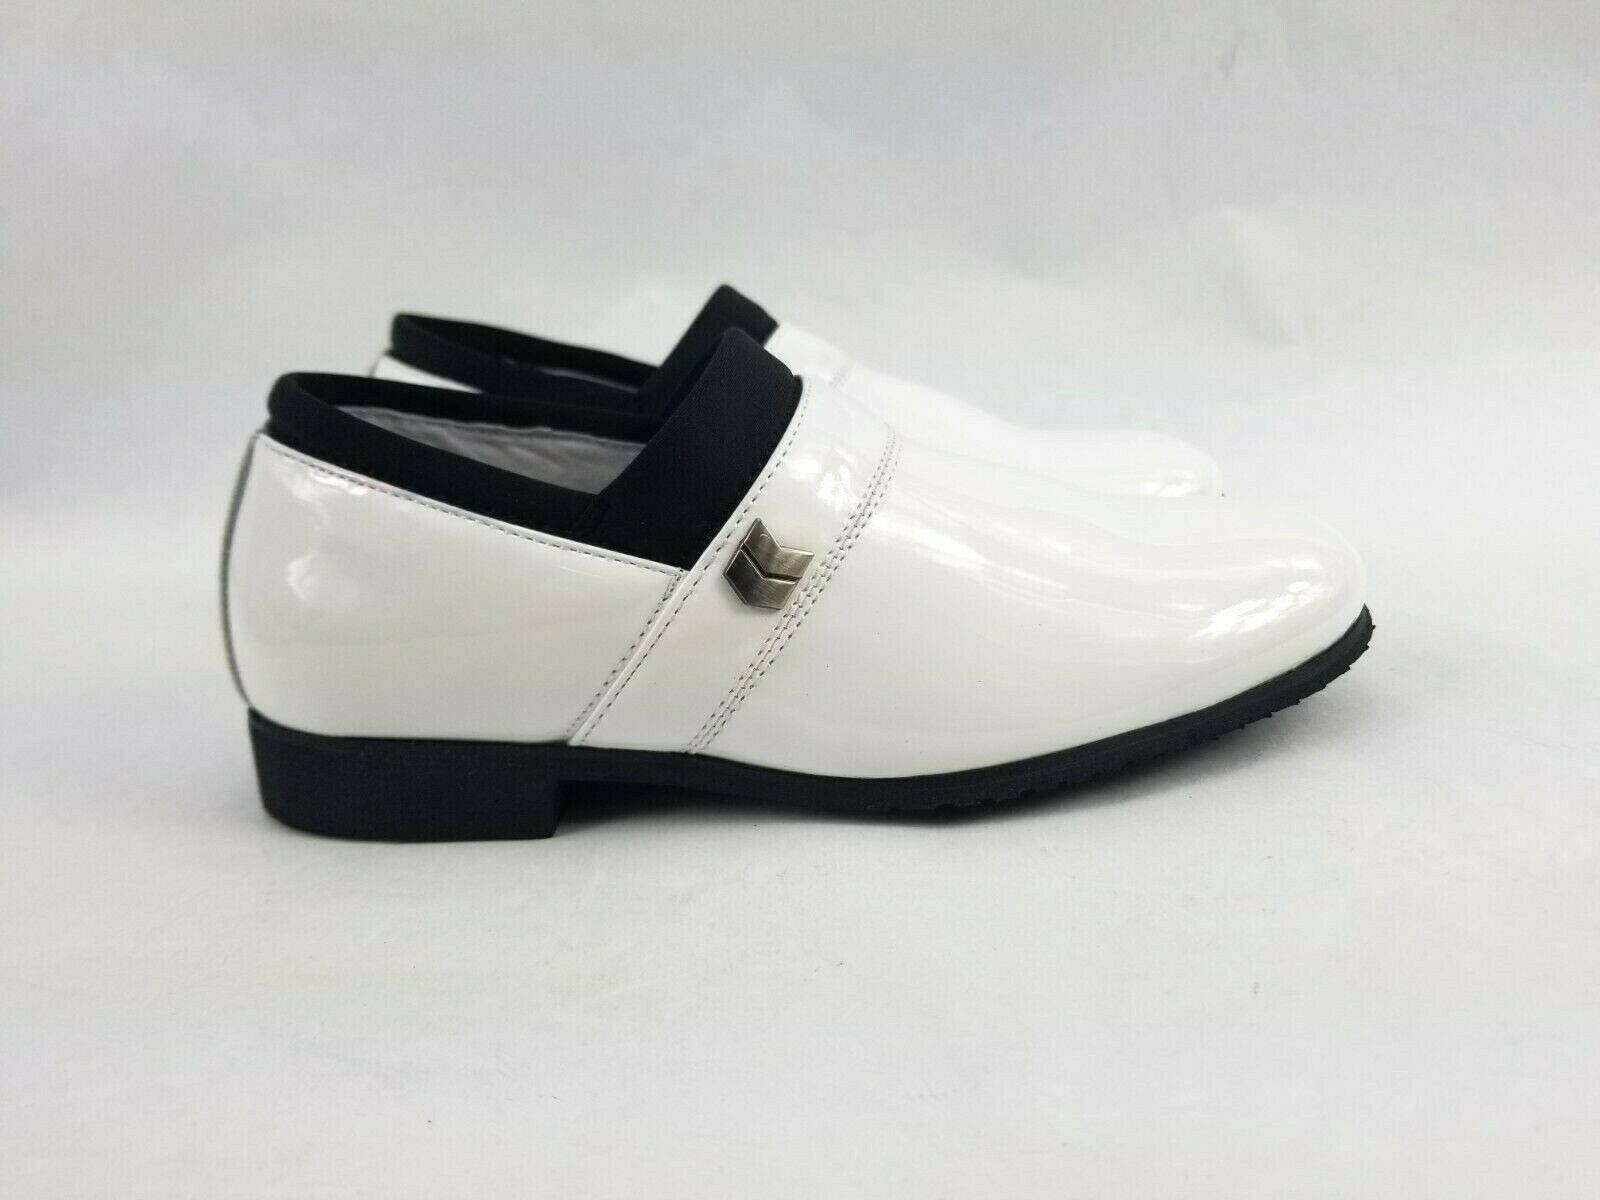 Conal Hamsa Boys Kids Shoes Toddler Size 6 White Shiny Dress Shoes Leather Lined